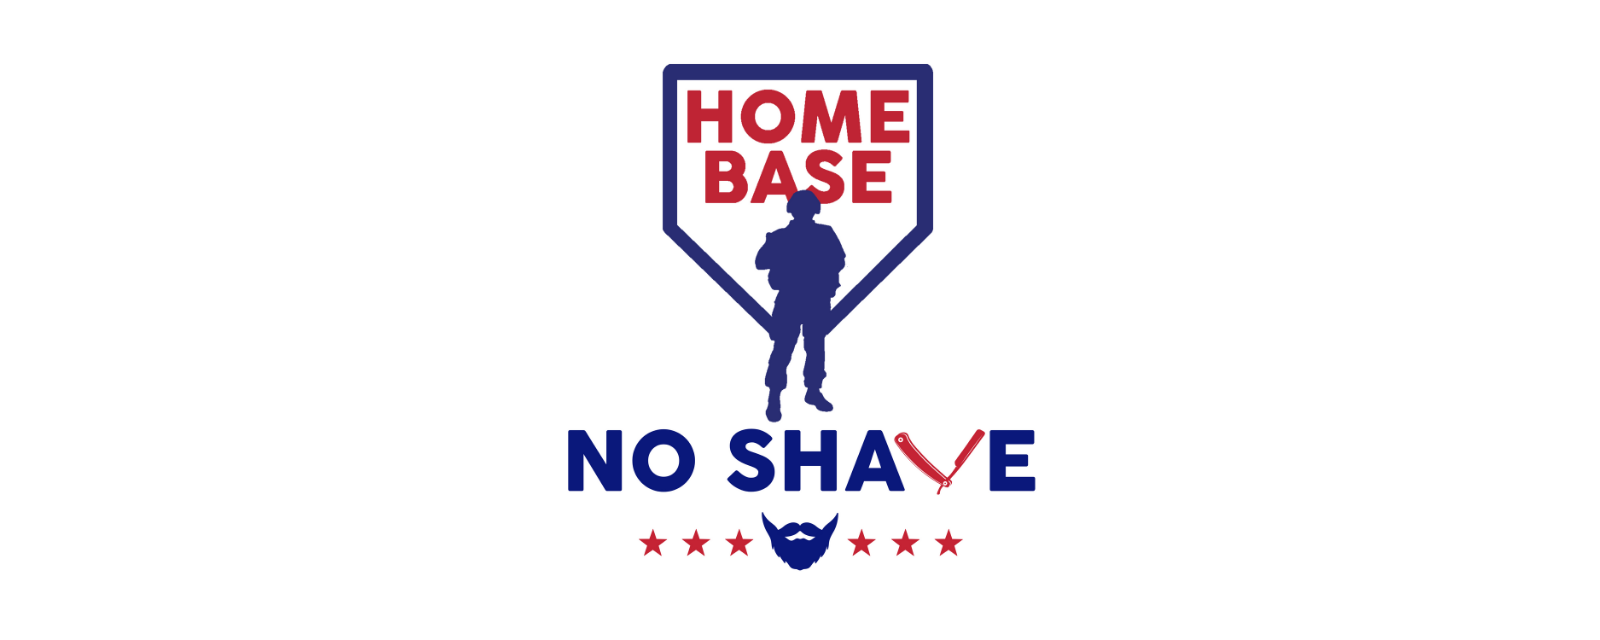 2022 8th Annual Home Base No Shave